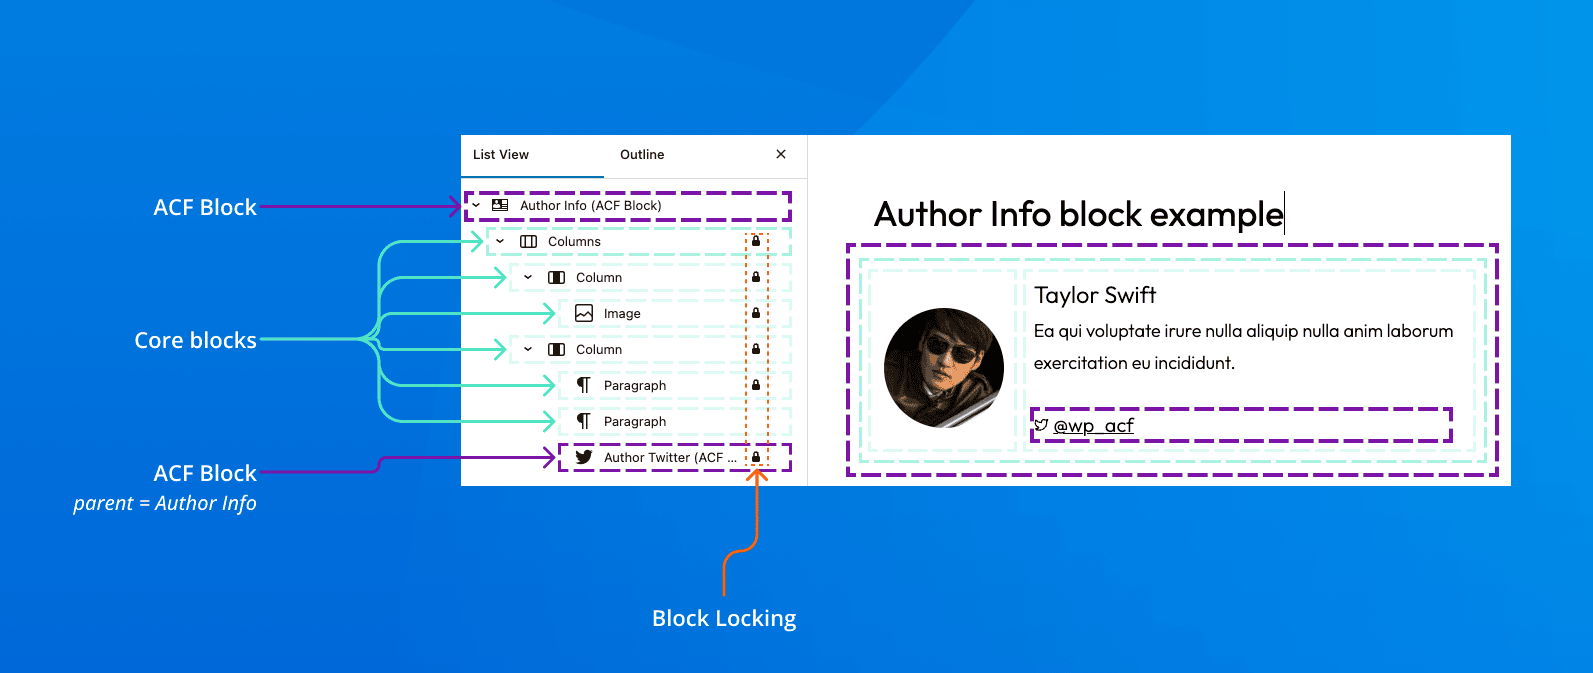 Author Info block example with lines pointing to differentiated blocks.